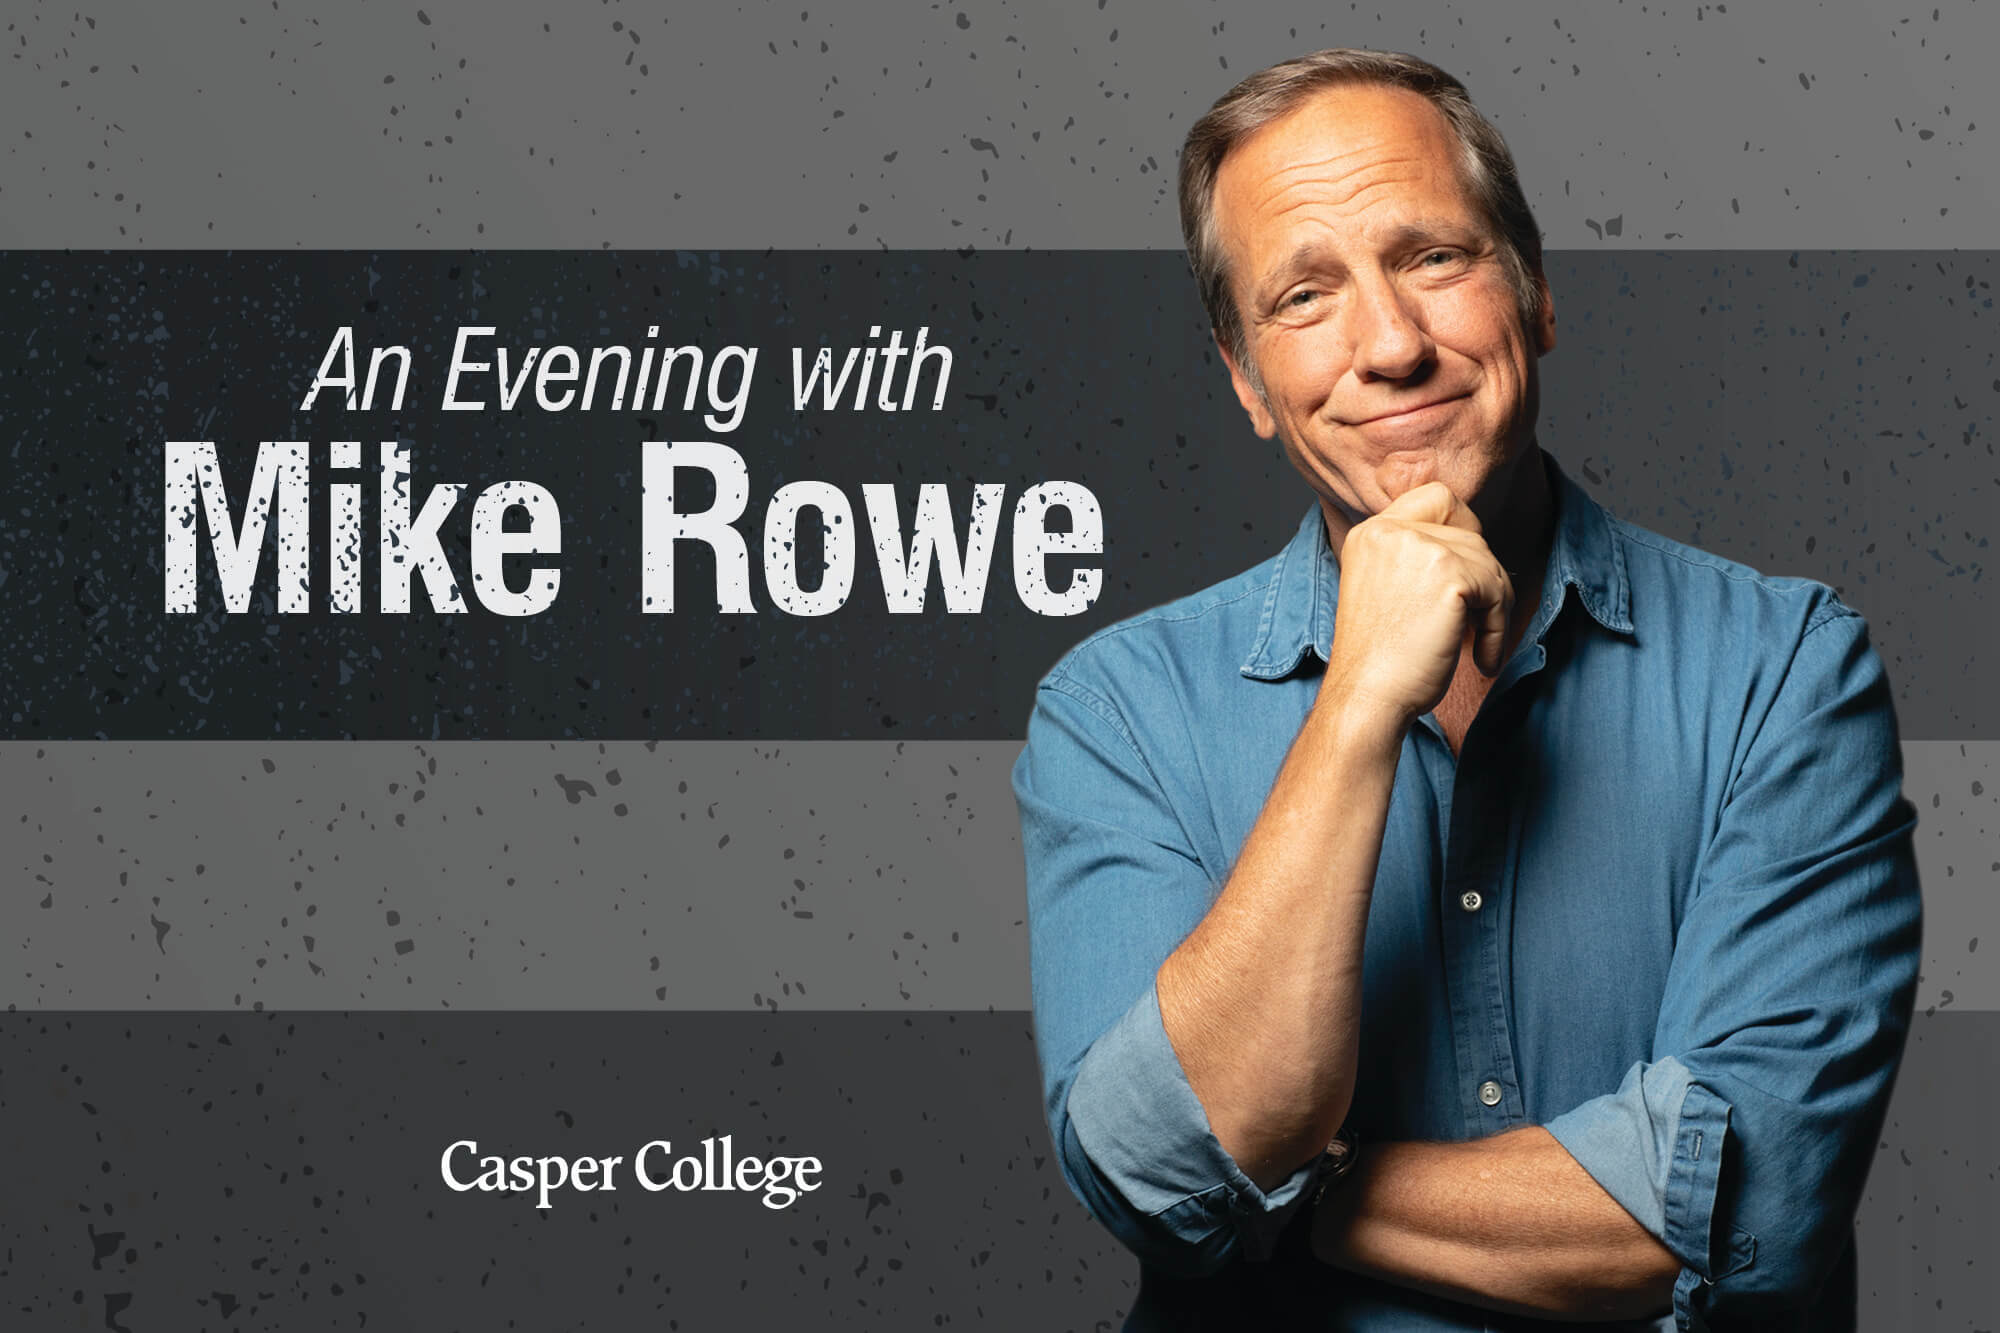 Image for Mike Rowe press release.